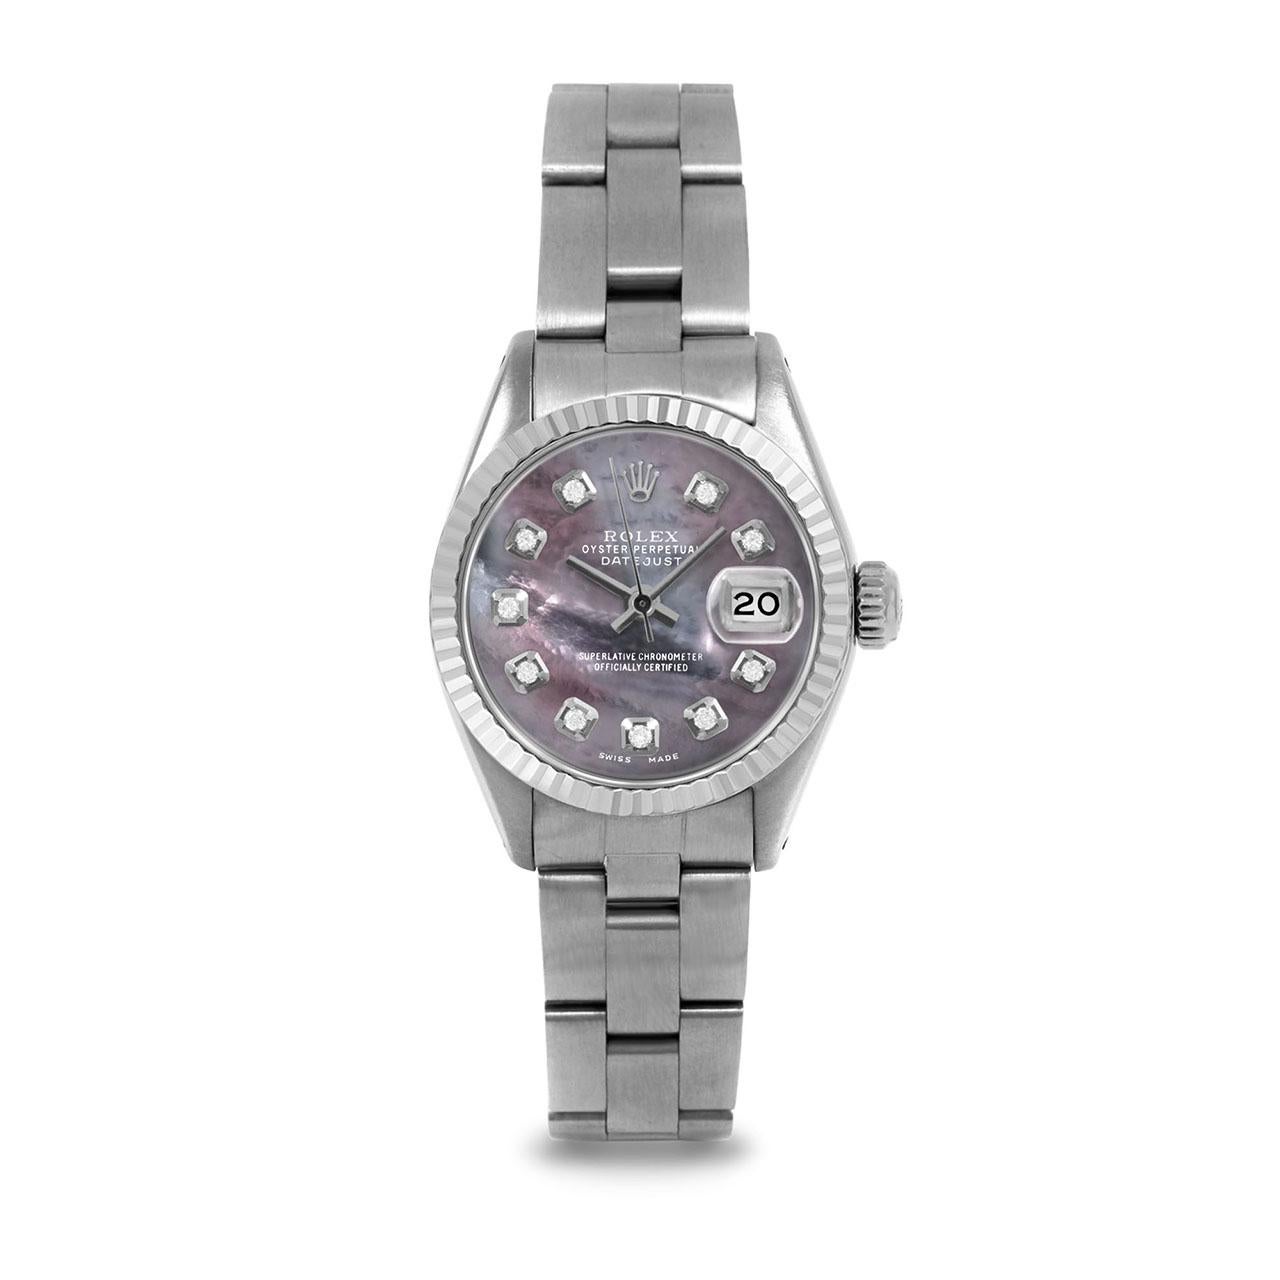 Pre-Owned Rolex 6917 Ladies 26mm Datejust Watch, Custom Black Mother of Pearl Diamond Dial & Fluted Bezel on Rolex Stainless Steel Oyster Band.   

SKU 6917-SS-BMOP-DIA-AM-FLT-OYS


Brand/Model:        Rolex Datejust
Model Number:        6917
Style: